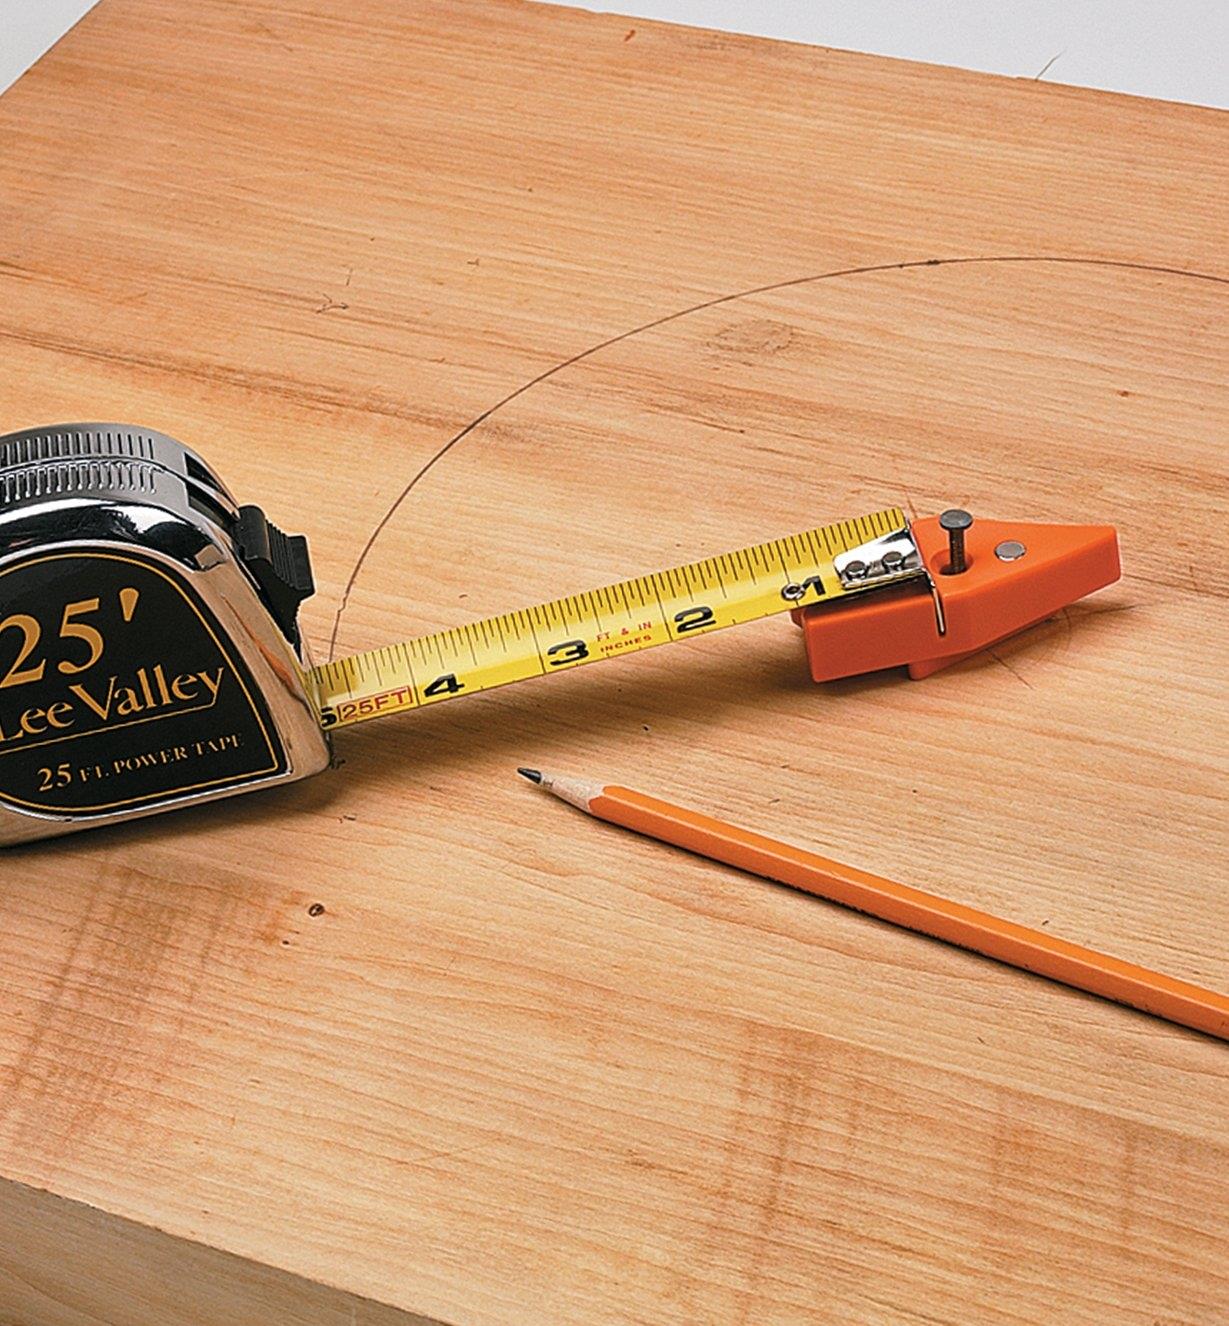 Using a measuring tape and tape tip to draw a circle on wood